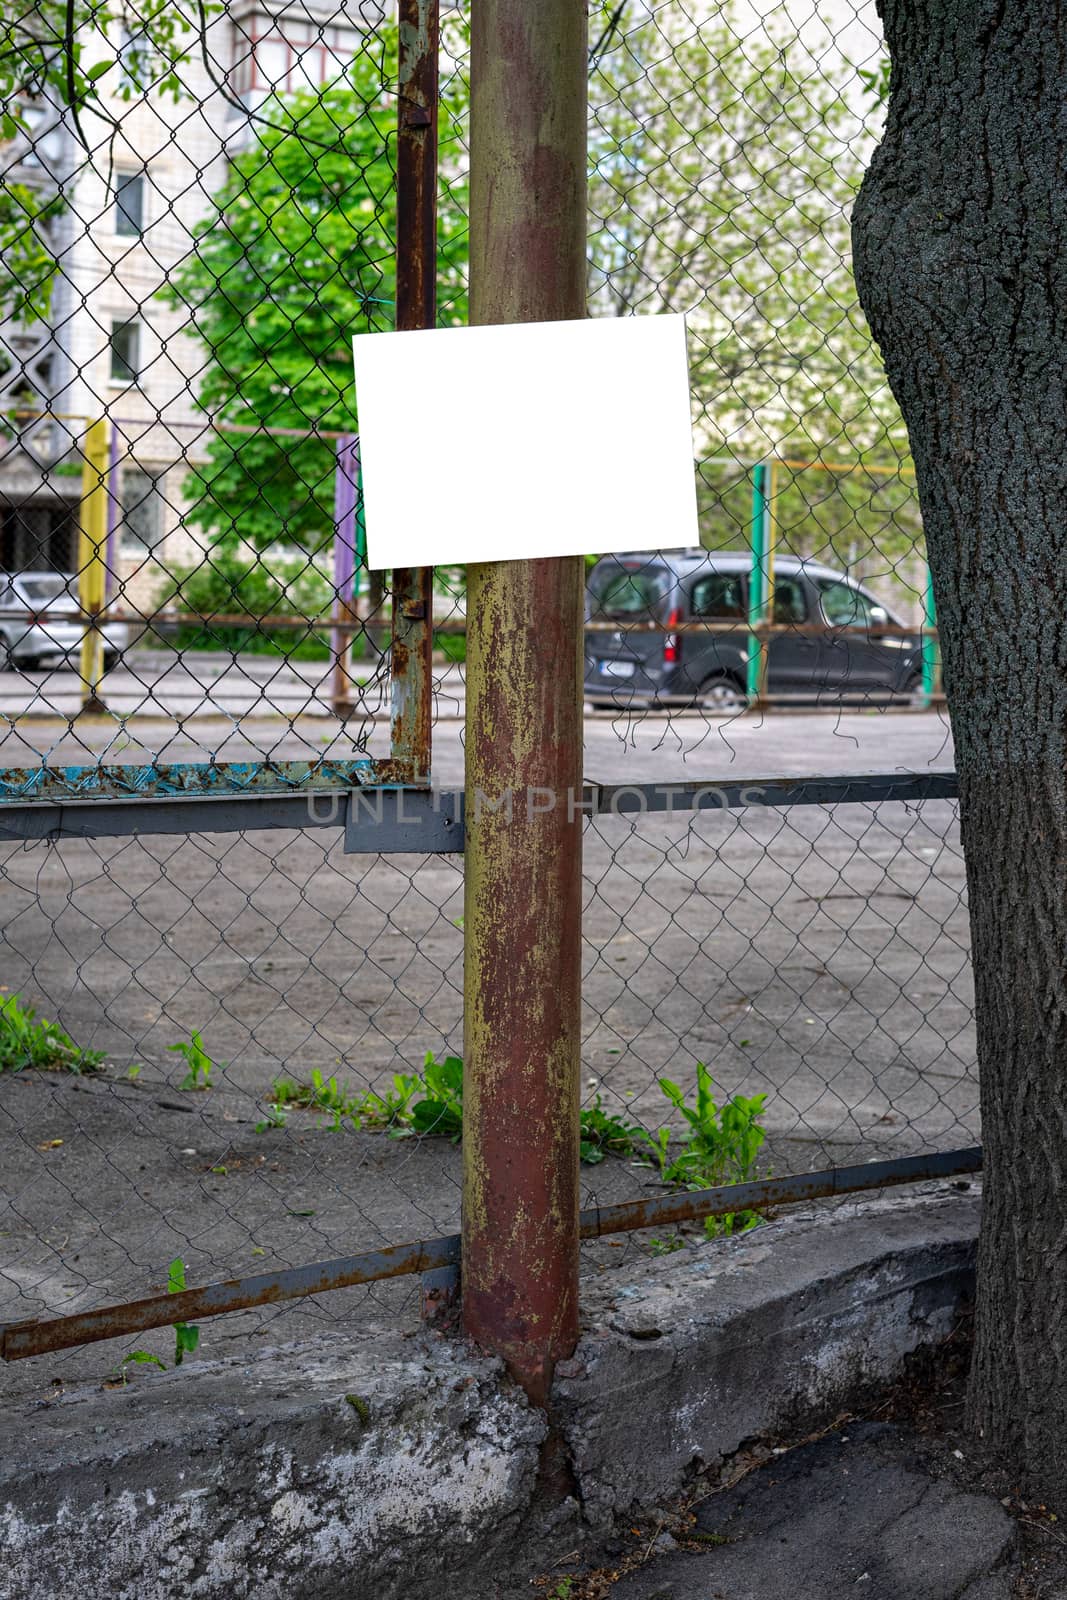 Basketball court fenced with a net. On the pillar hangs a sign for the inscription